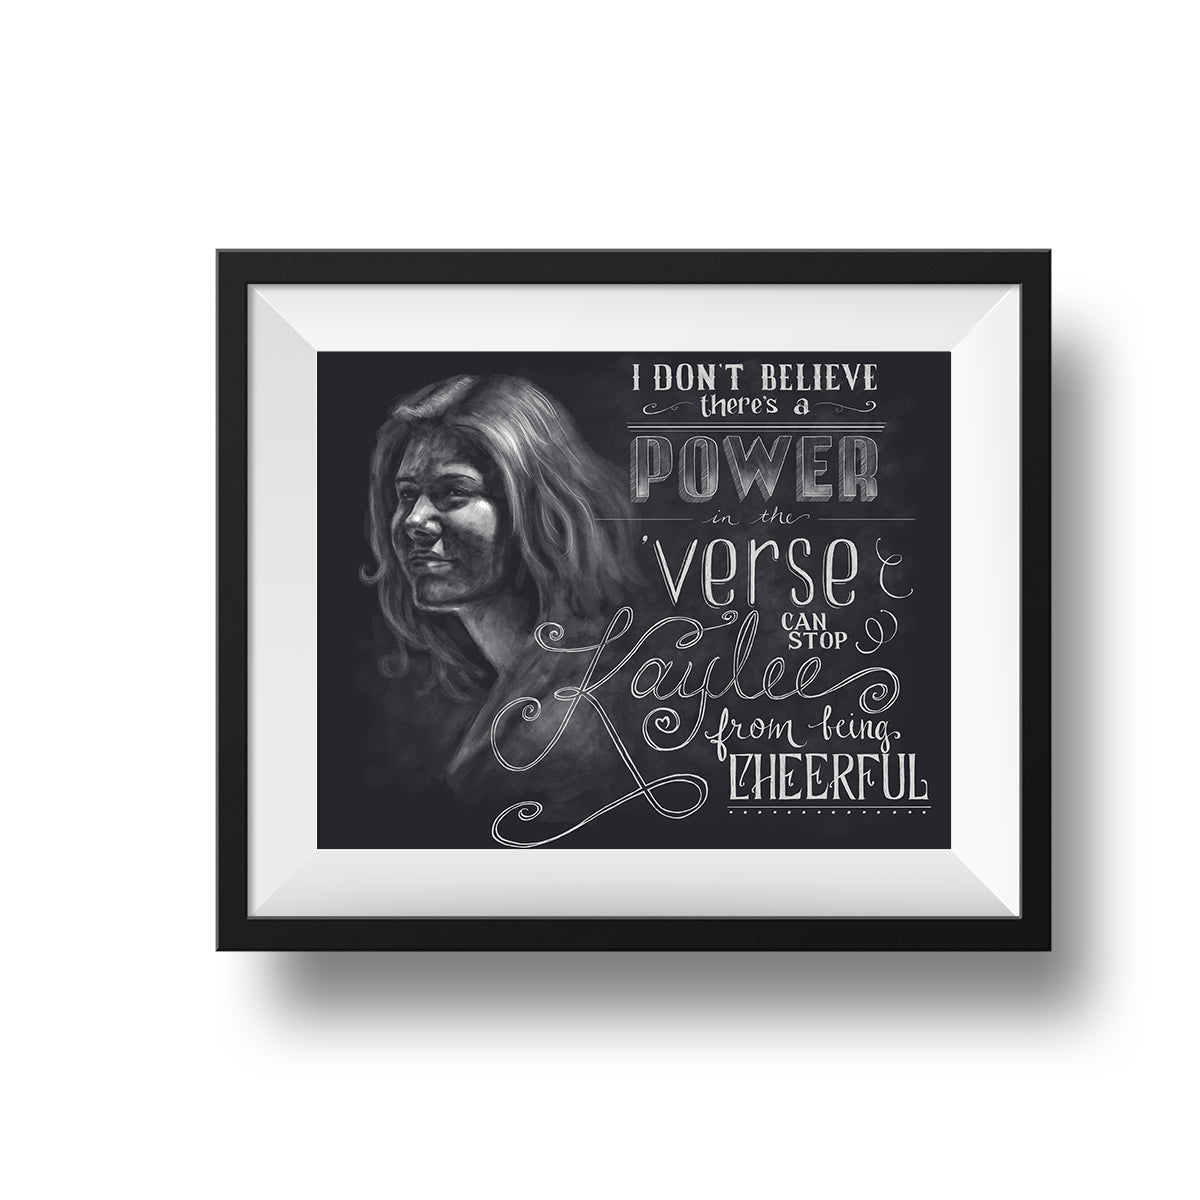 A black frame with a white mat holds a digital print of a white chalk portrait of Kaylee from Firefly with hand-lettered text that reads "I don't believe there's a power in the 'verse can stop Kaylee from being cheerful."